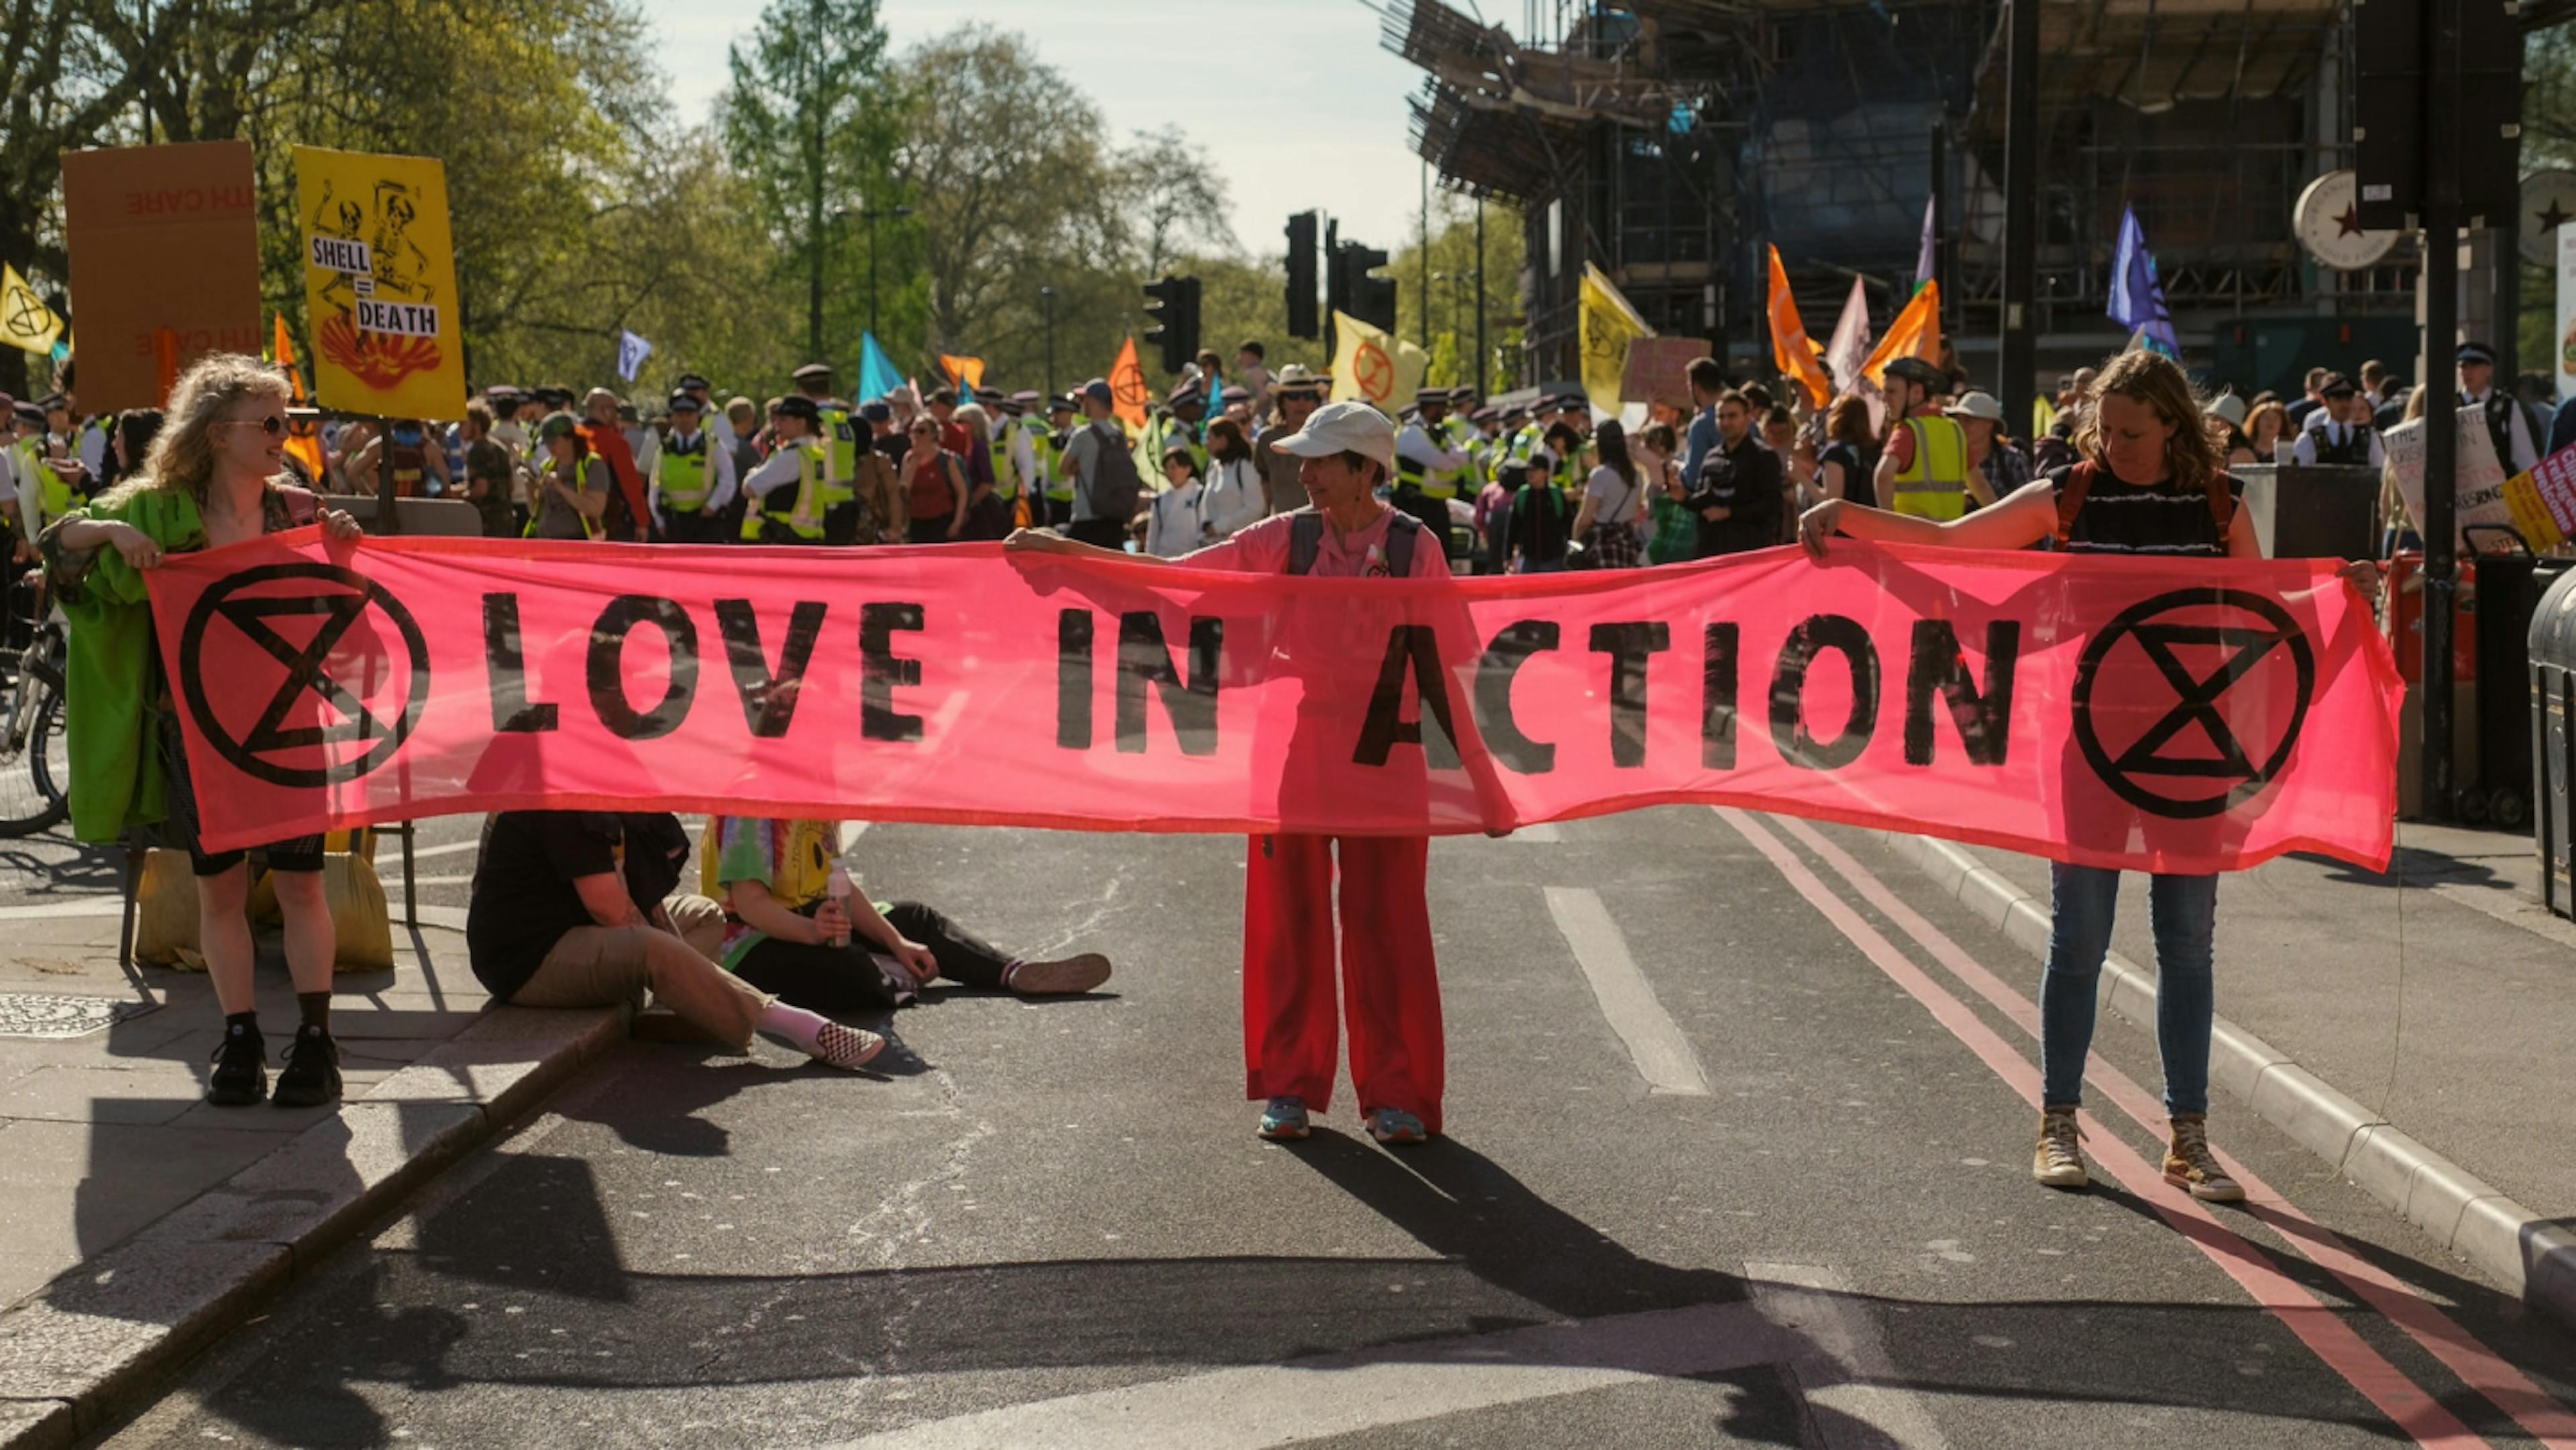 London climate activists at a protest.